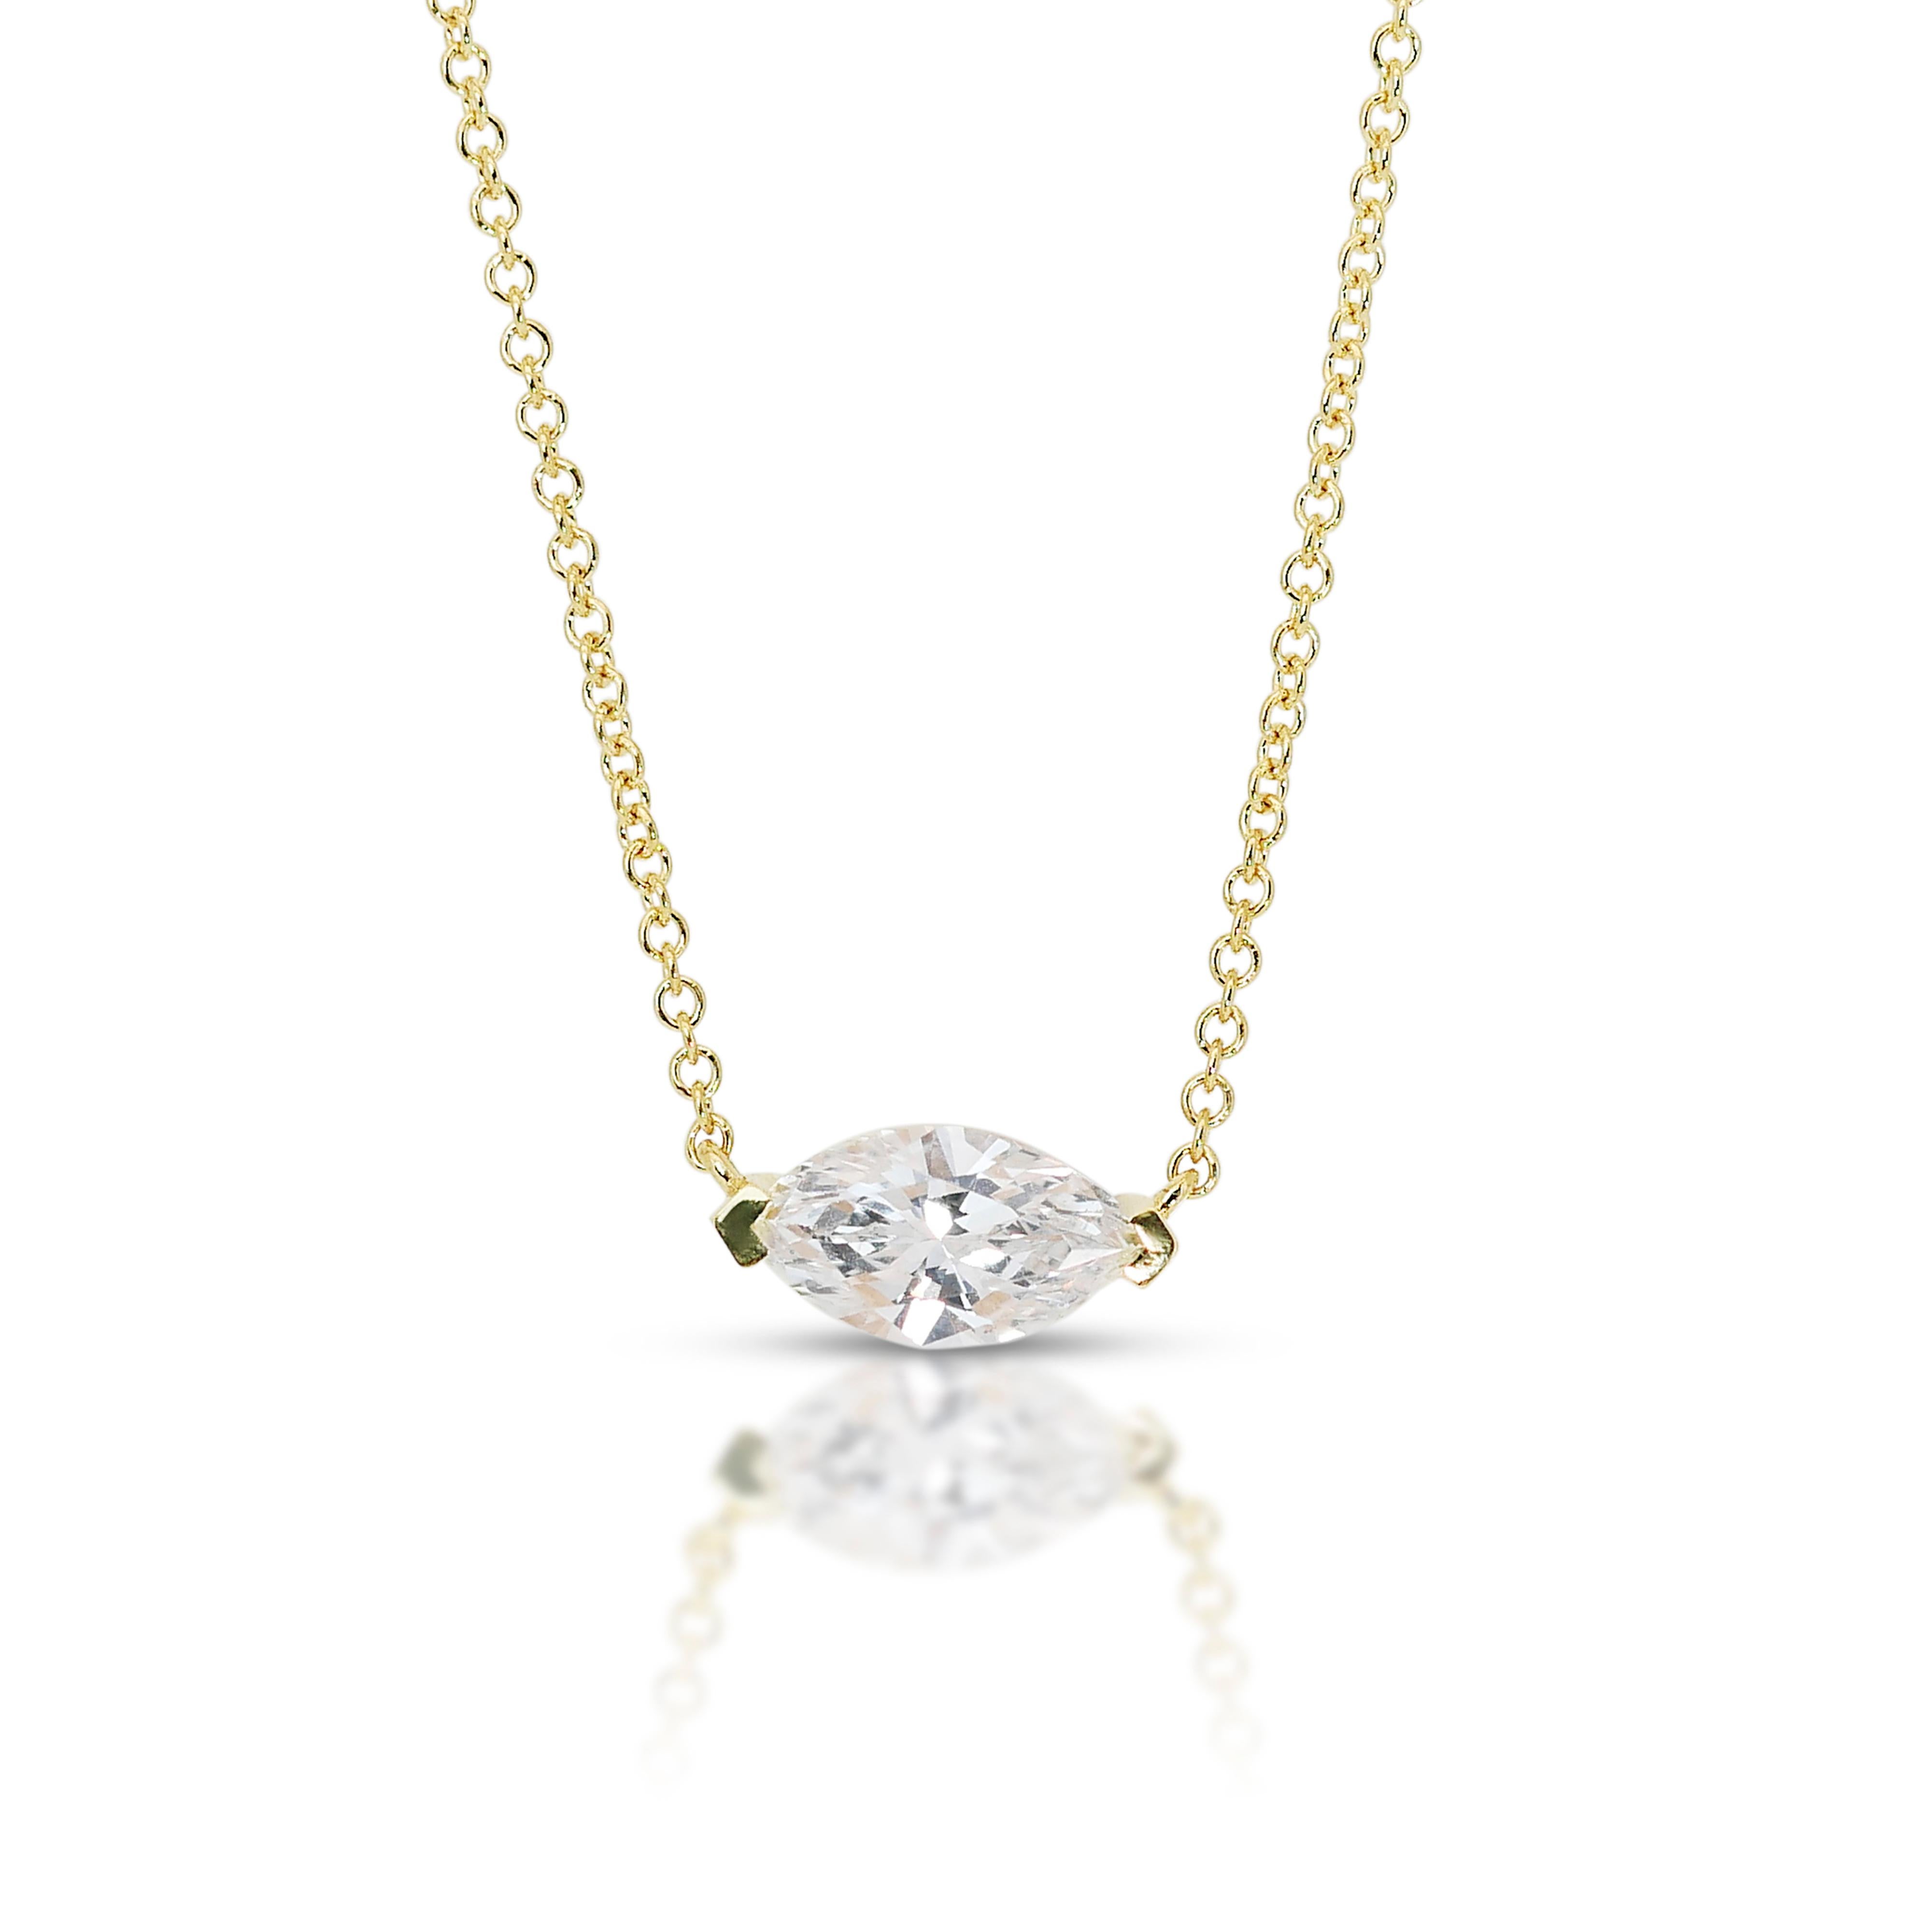 Elegant 1.01ct Diamond Solitaire Necklace in 18k Yellow Gold - GIA Certified

This exquisite solitaire necklace in 18k yellow gold features a stunning 1.01-carat marquise-cut diamond that exudes elegance and sophistication. With its timeless design